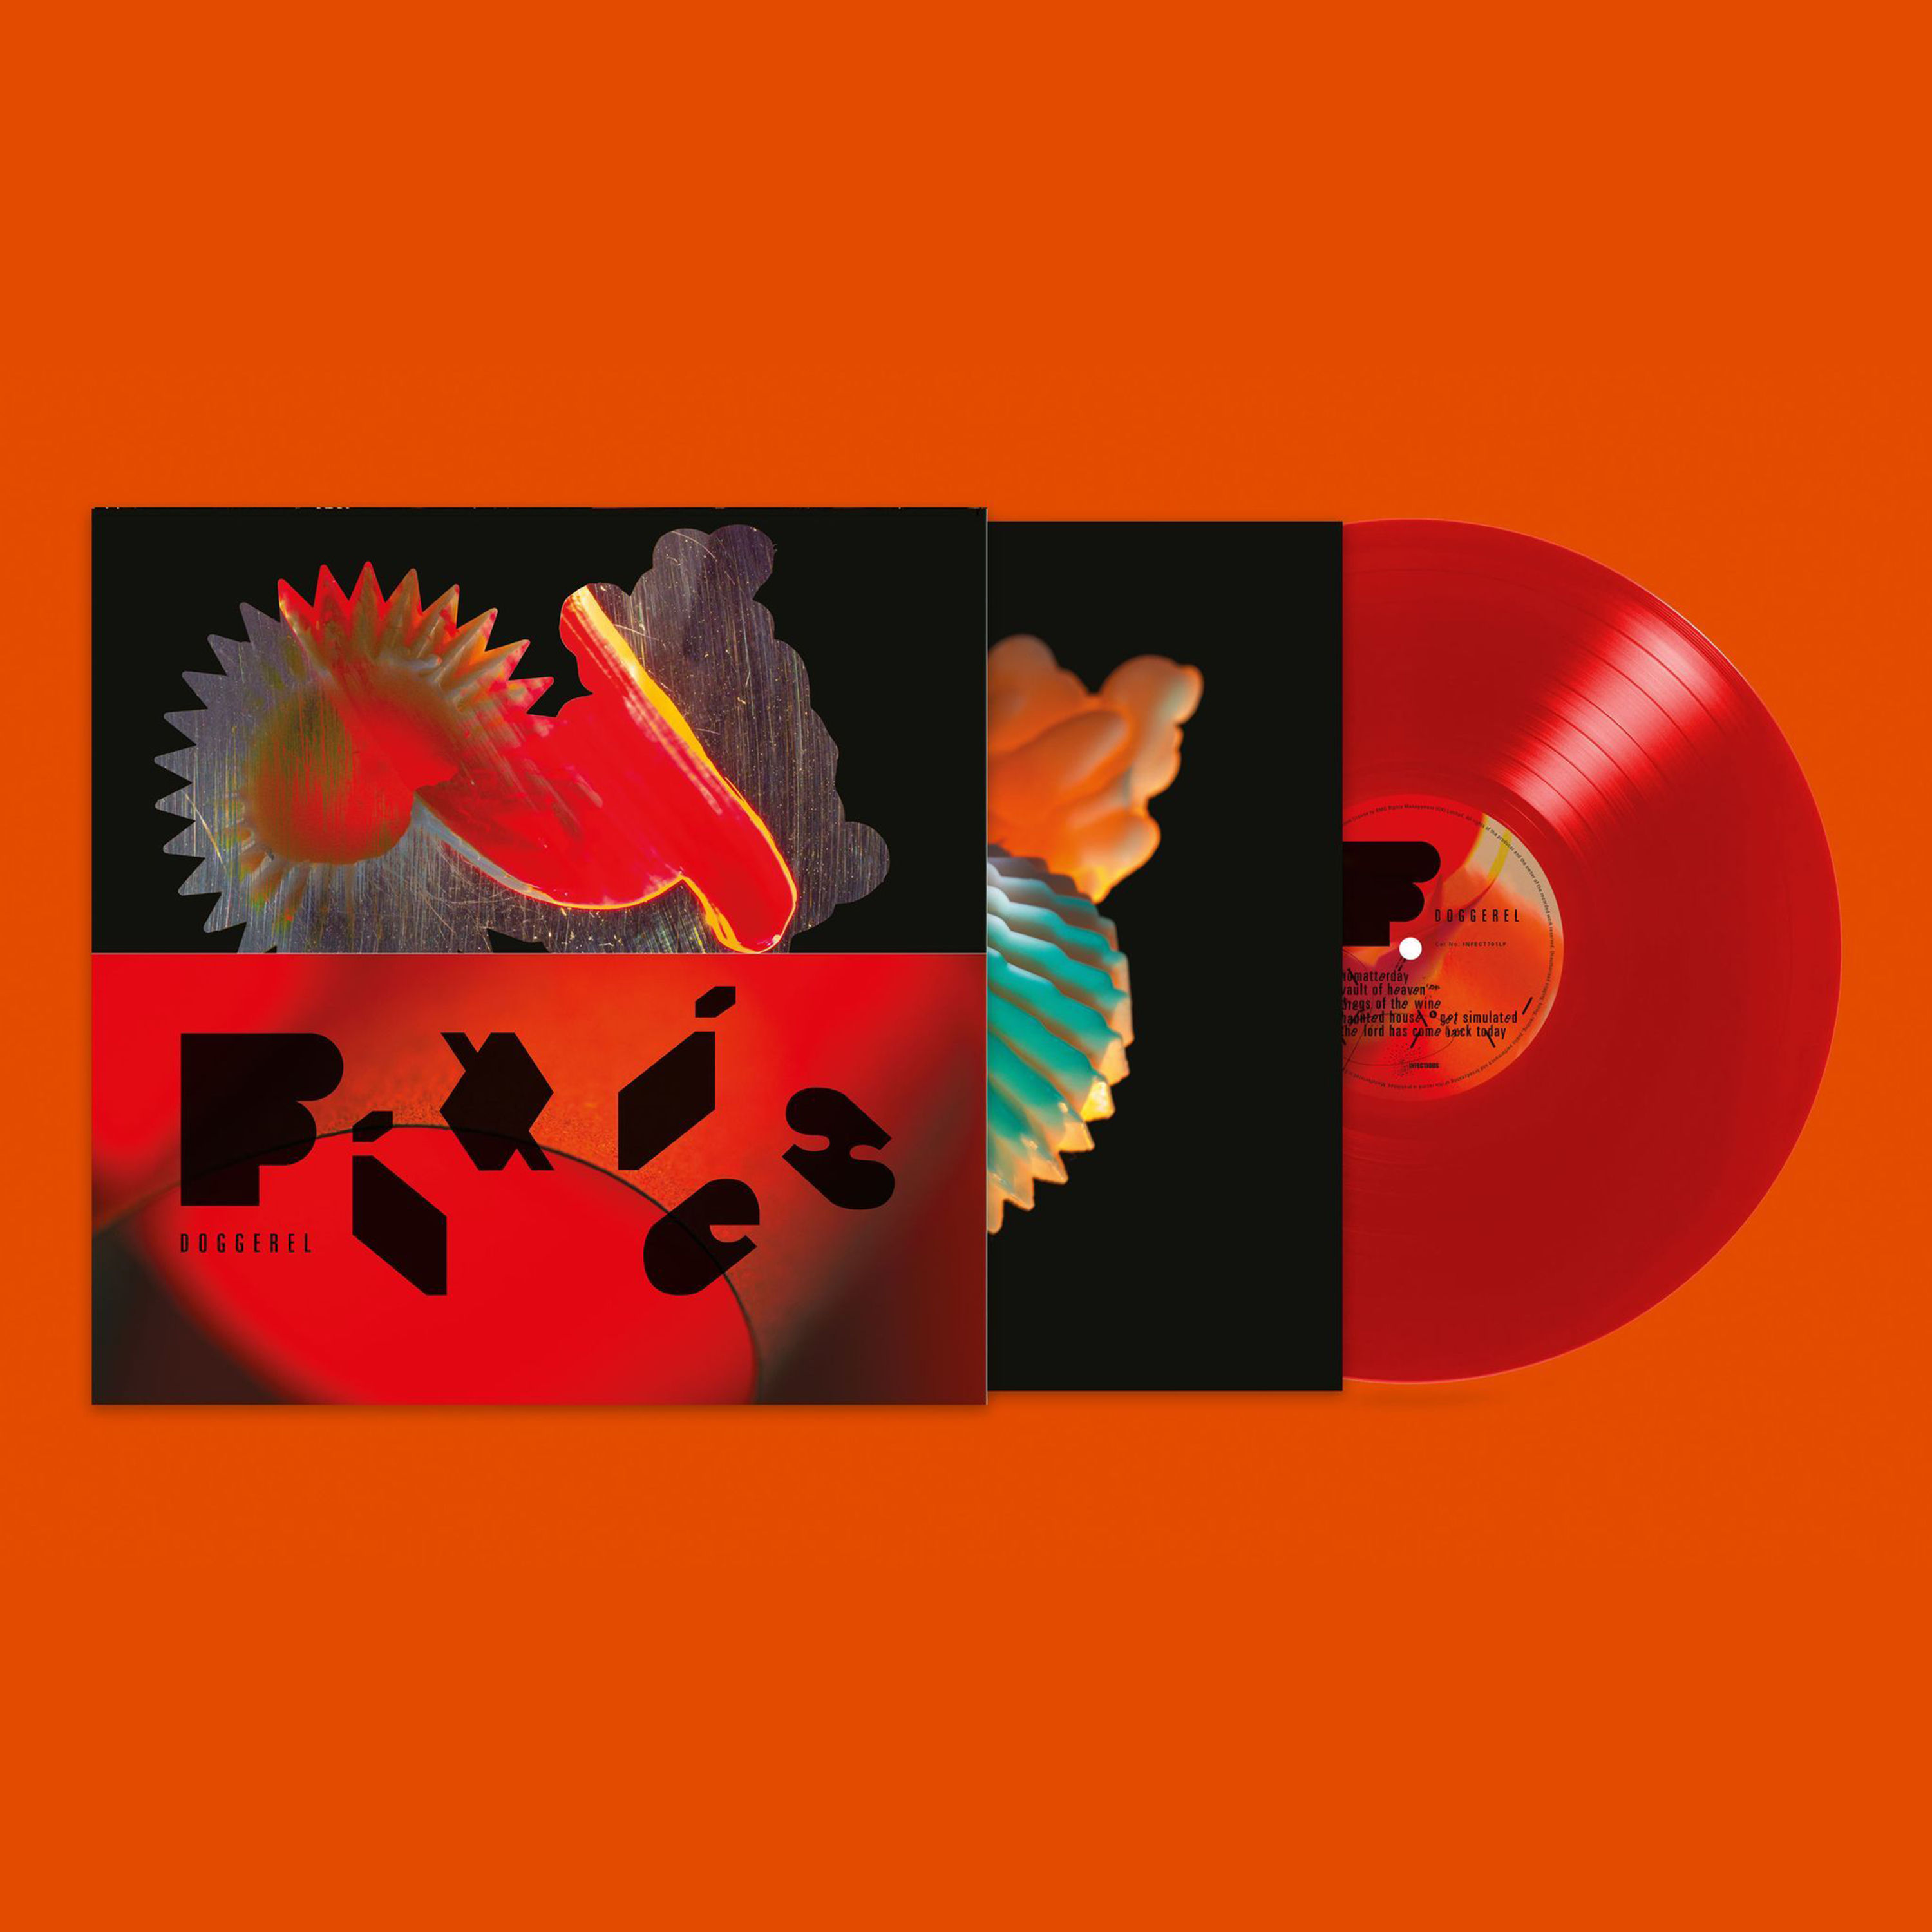 Pixies - Doggerel (Limited Edition Red Vinyl)